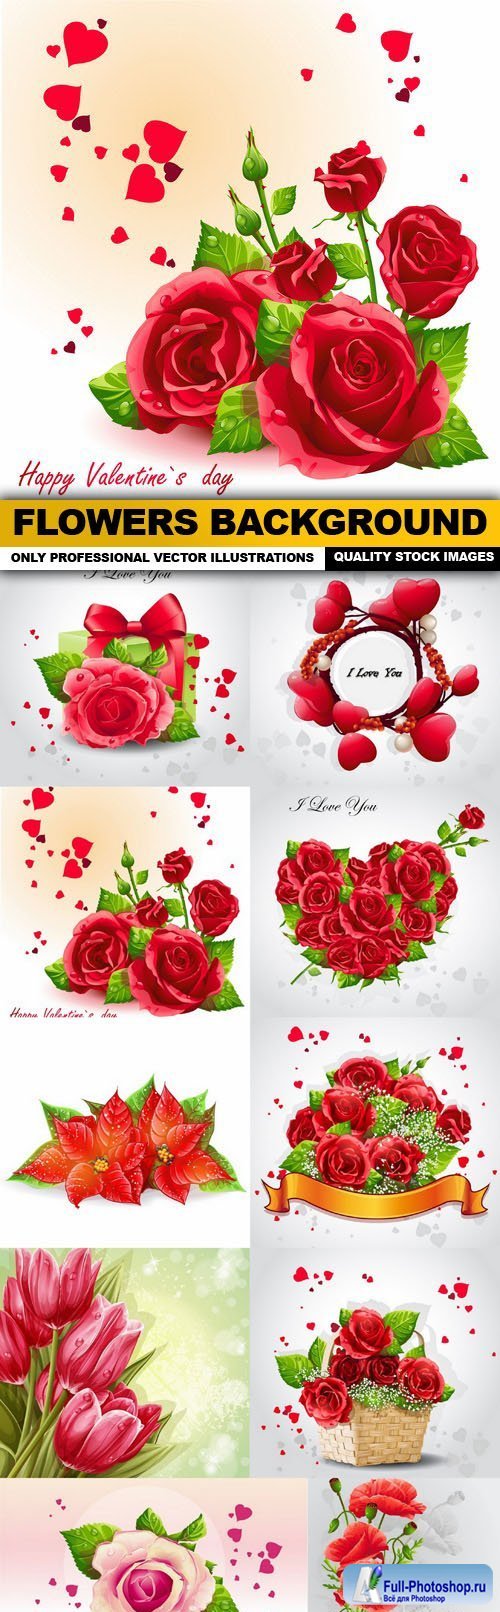 Flowers Background - 10 Vector